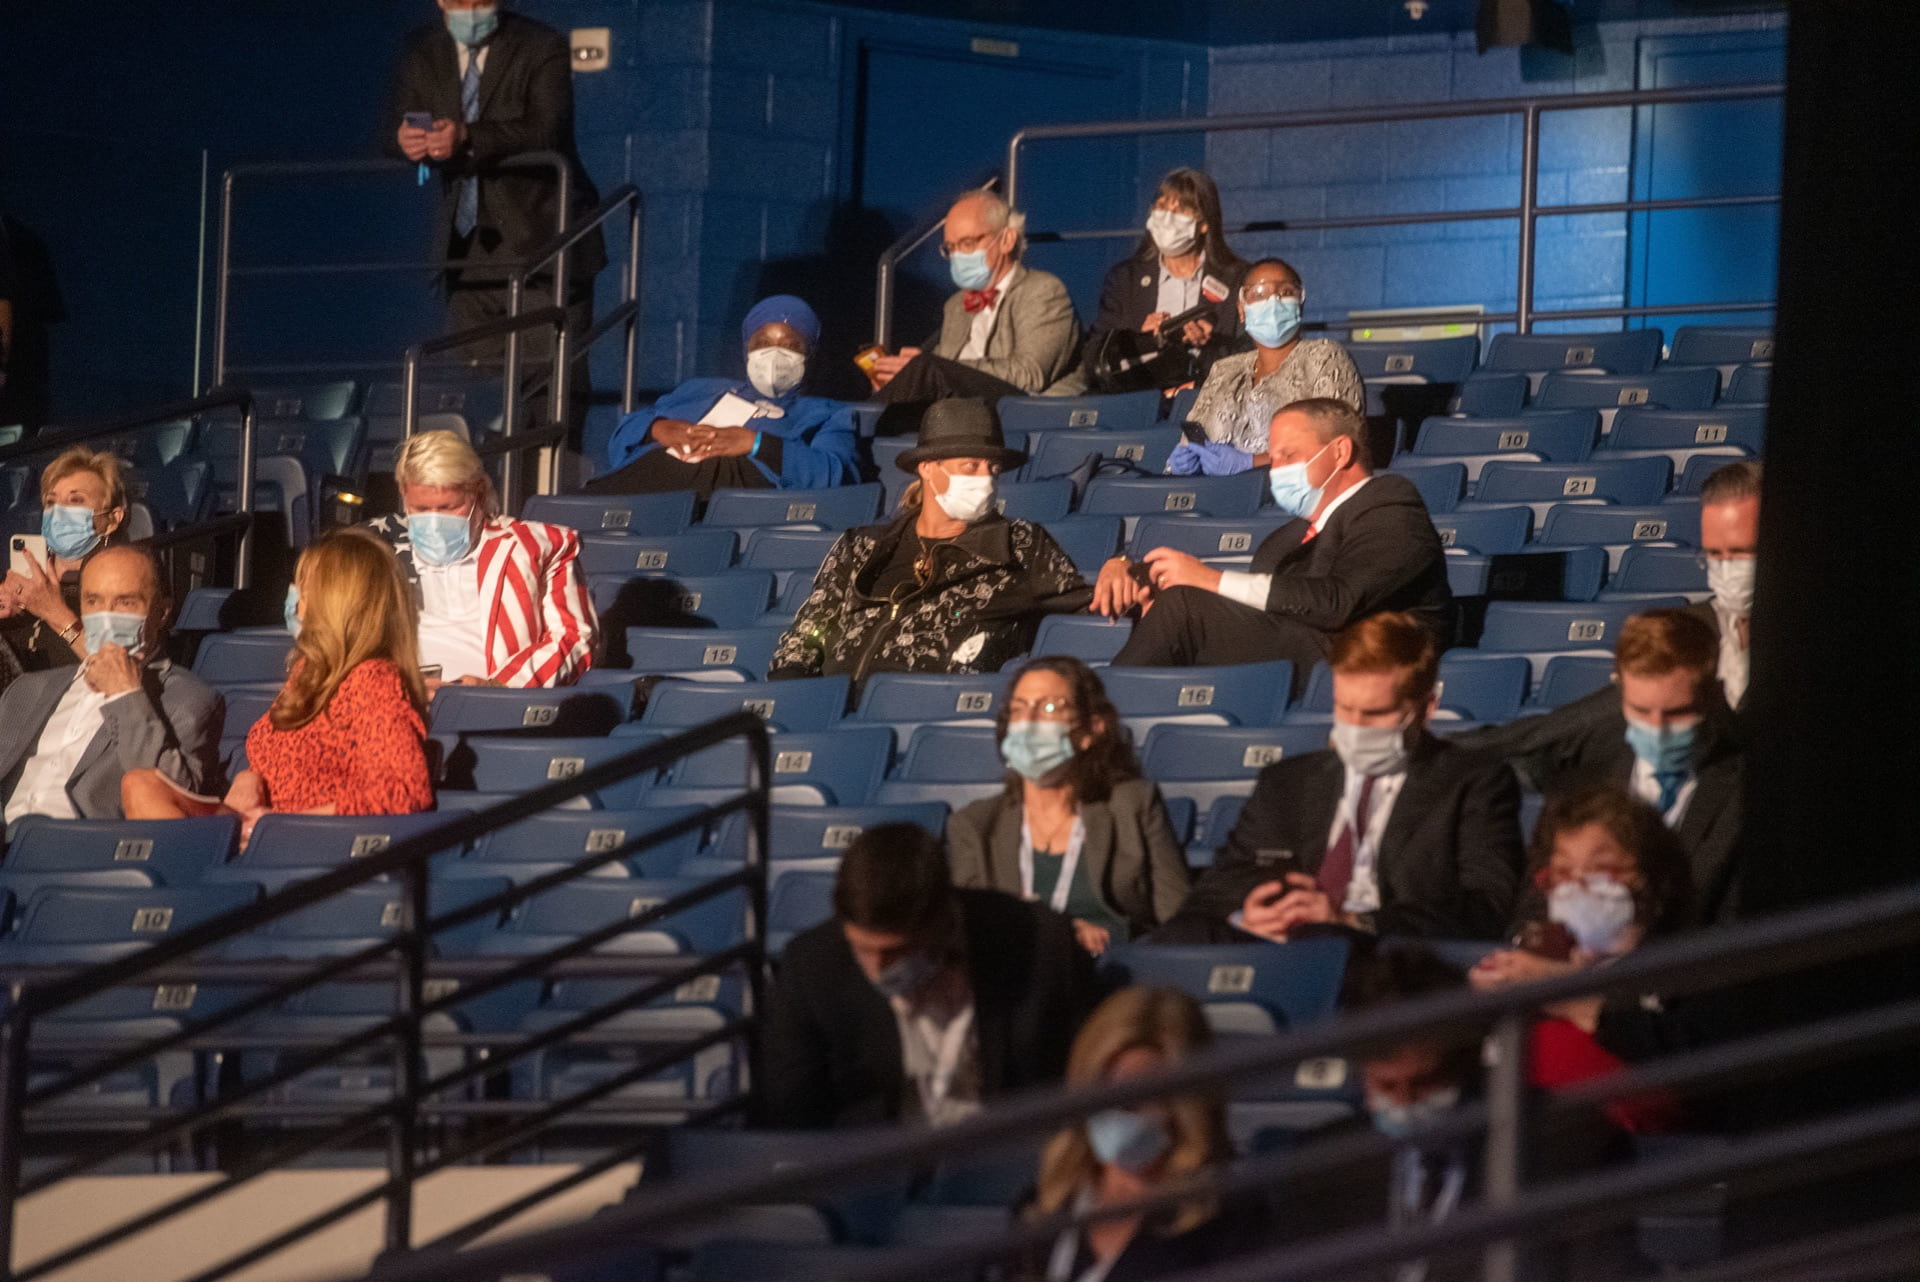 The crowd of the 2020 Presidential Debate at Belmont University